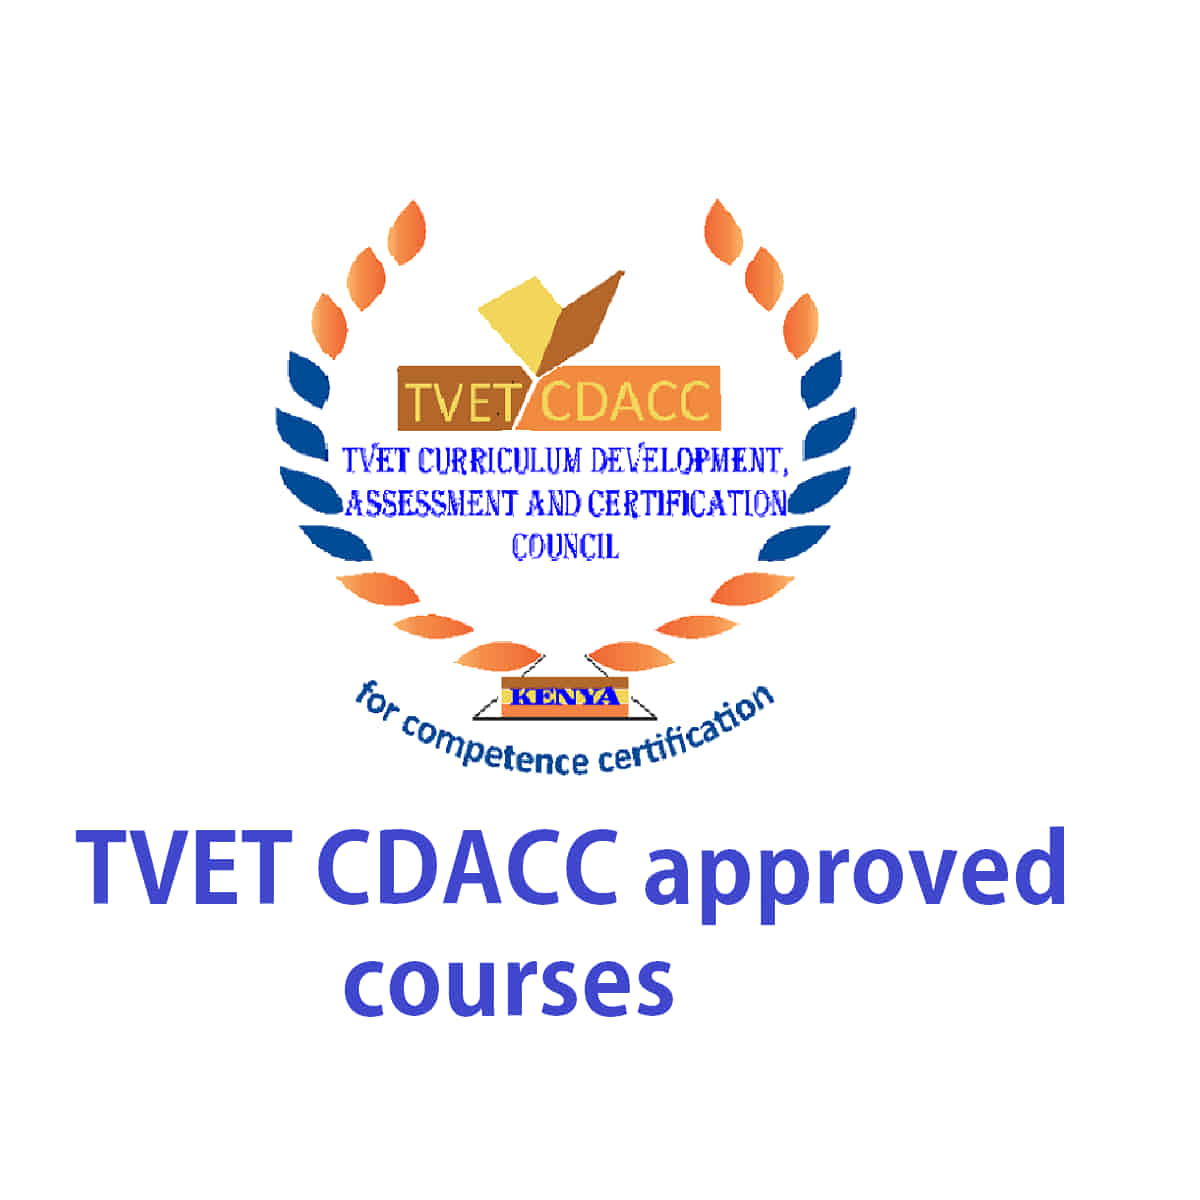 TVET CDACC approved courses